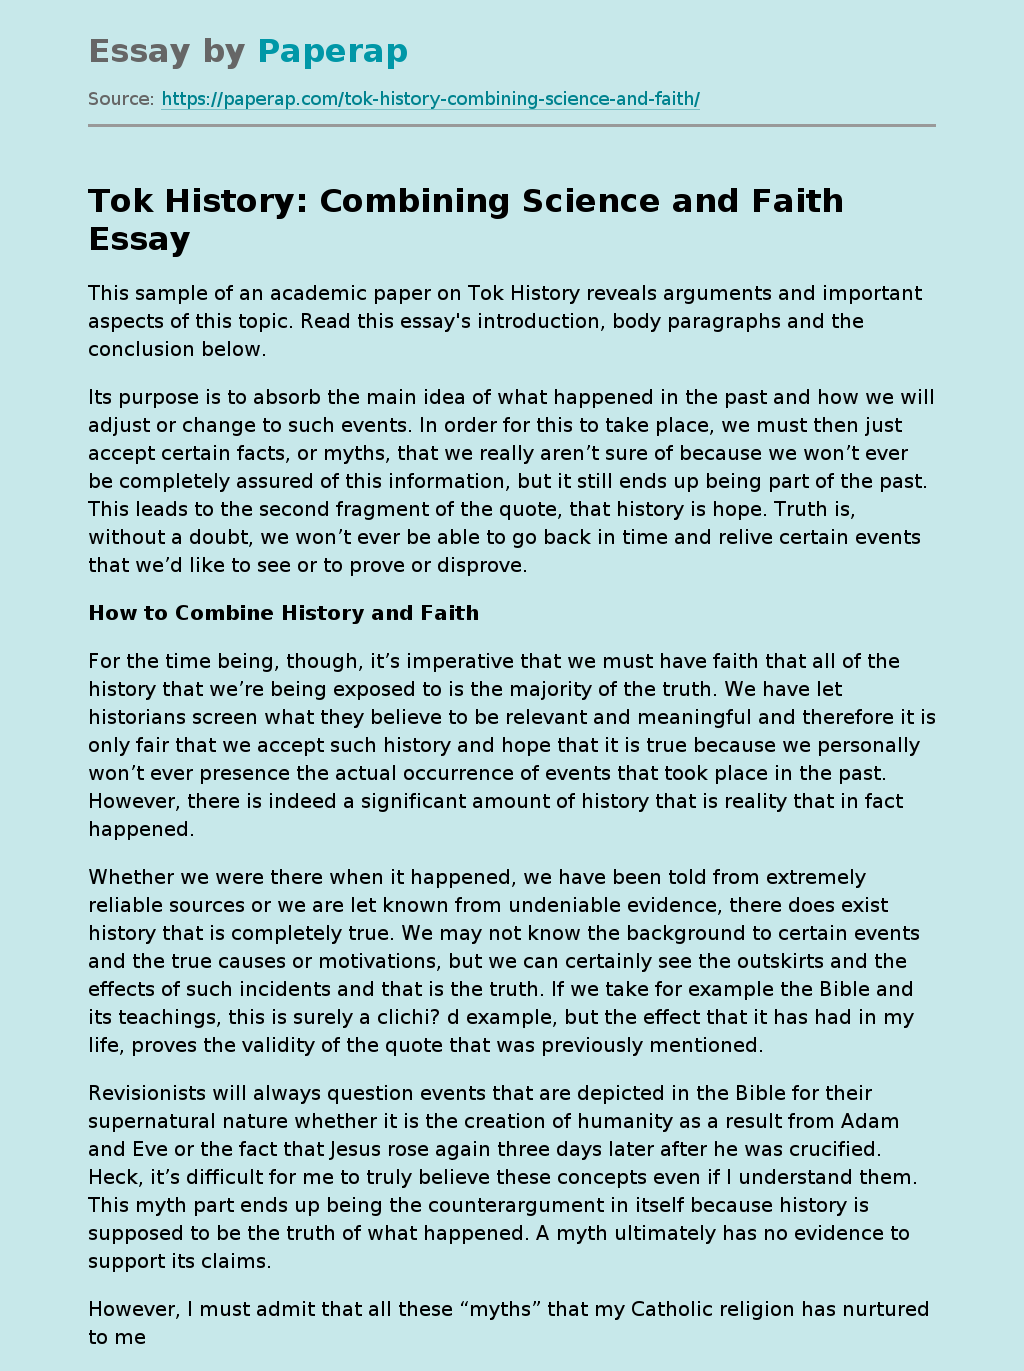 Tok History: Combining Science and Faith